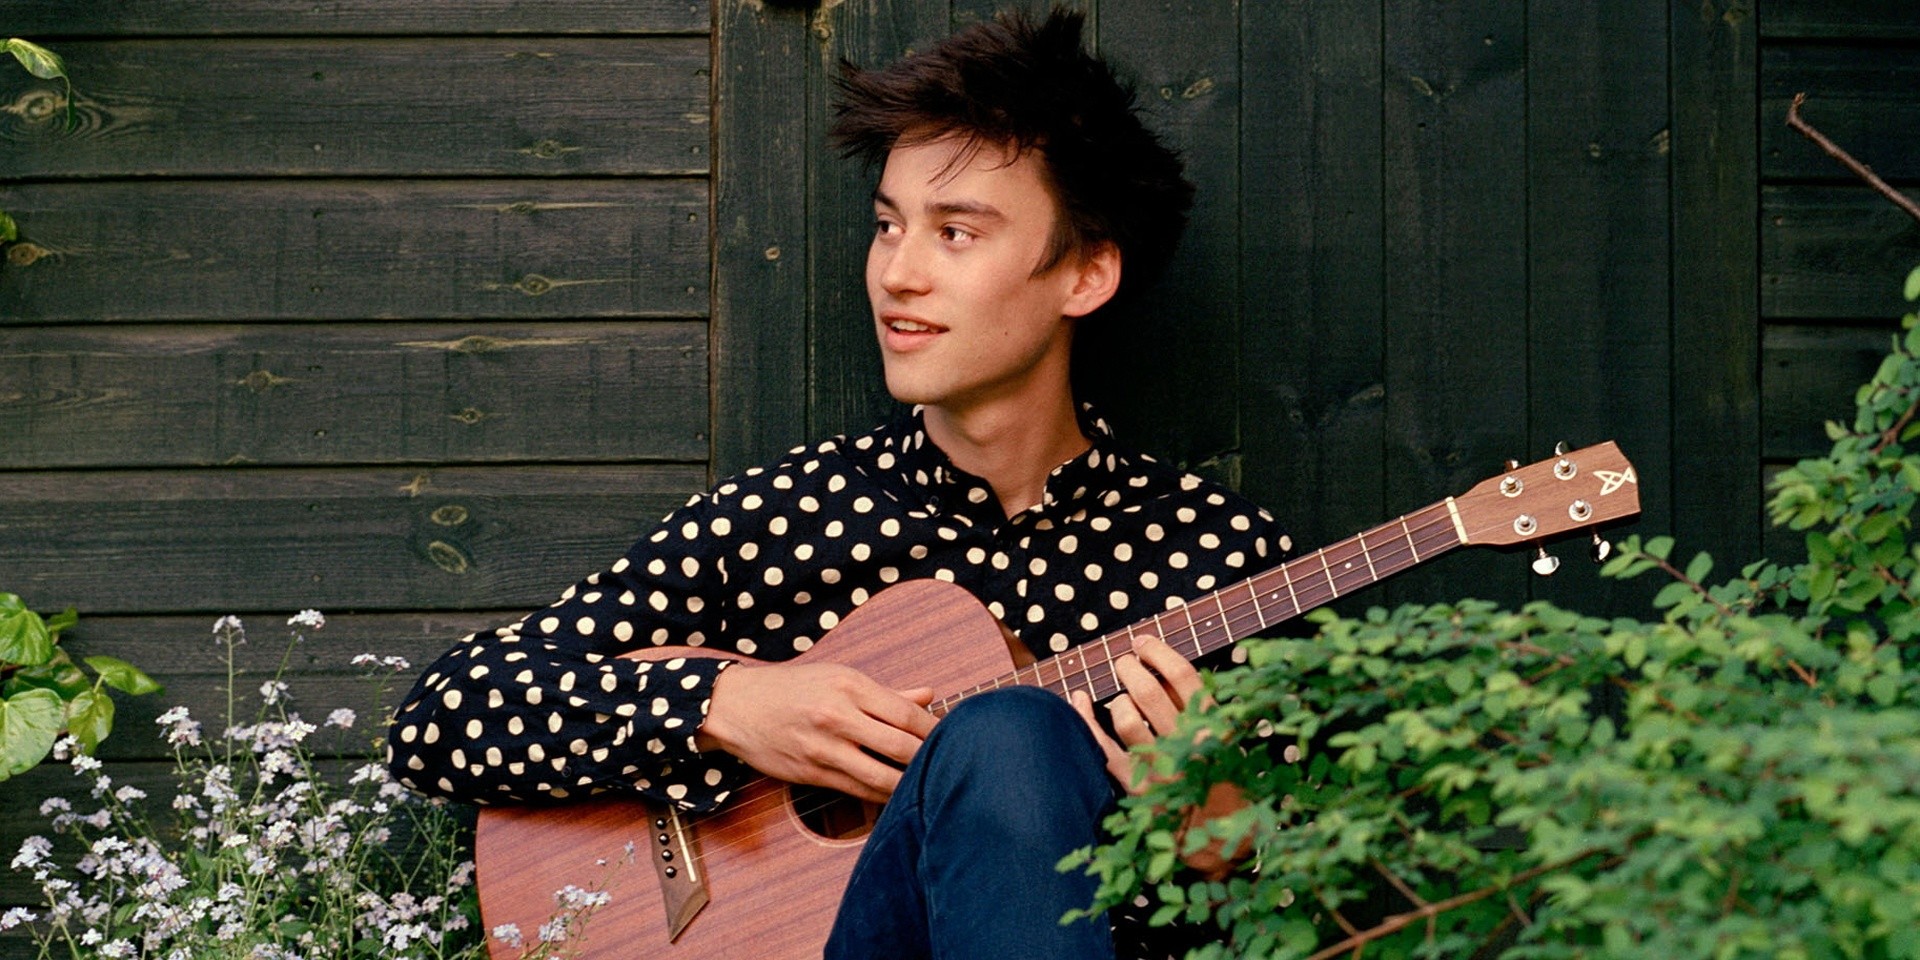 "You can shape the nature of this tour": Jacob Collier announces new direction for Djesse World Tour